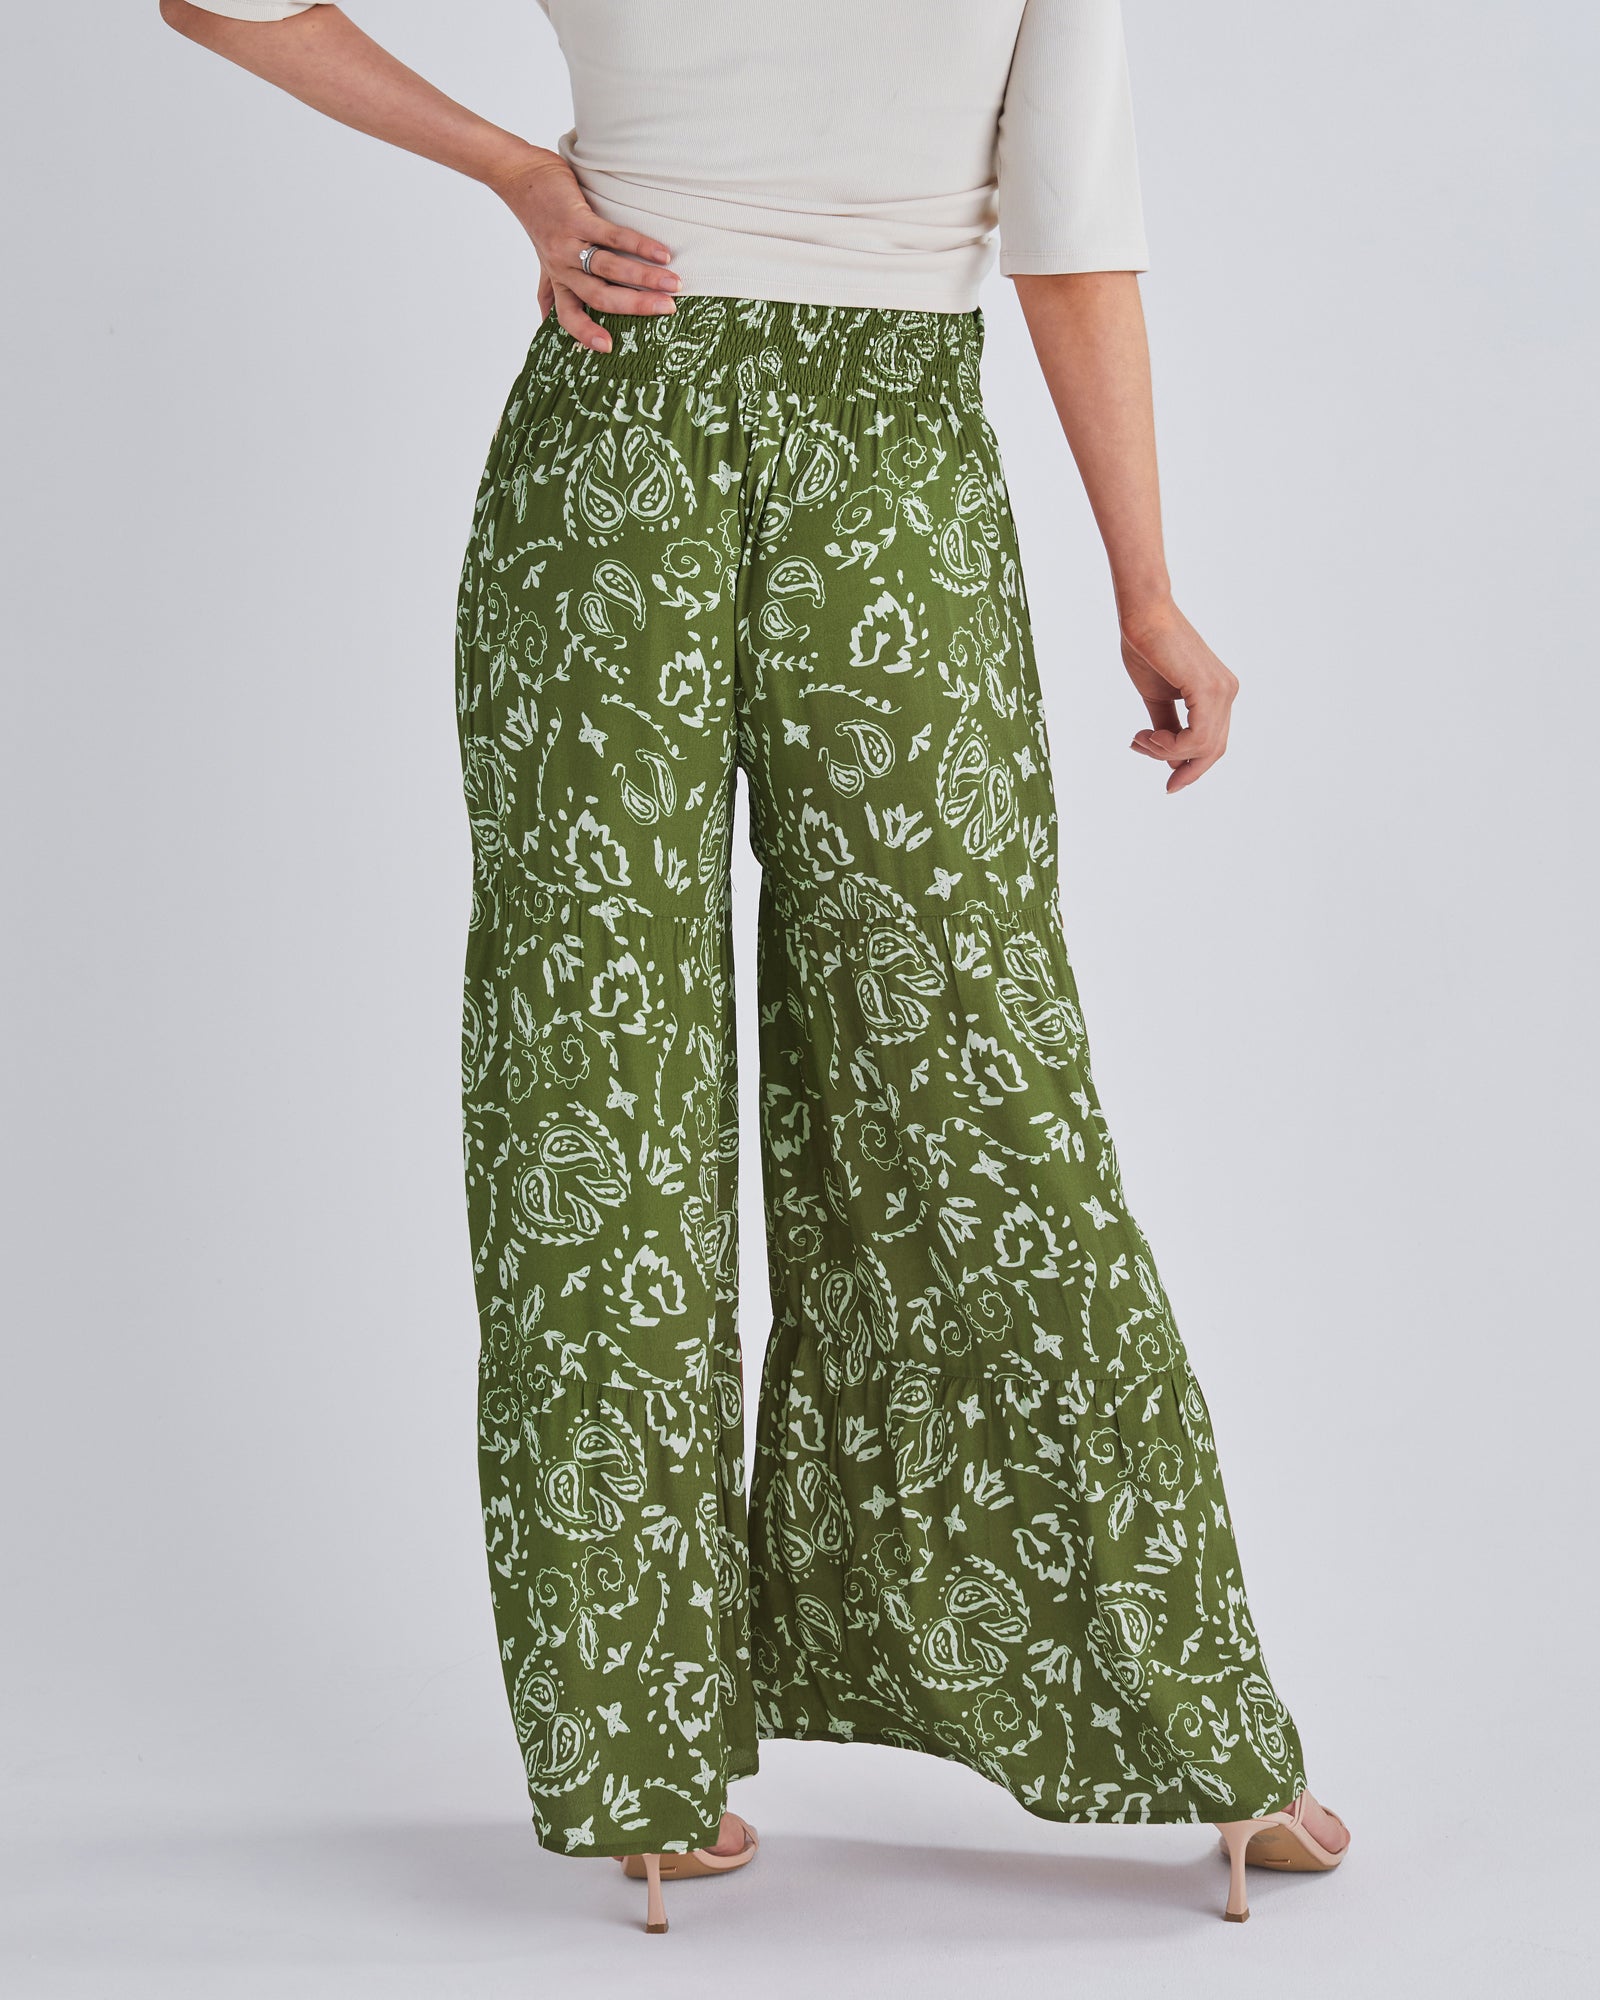 Back View - A pregnant Woman Wearing Stacie Wide Leg Khaki Maternity Pants in Paisley Print from Angel Maternity